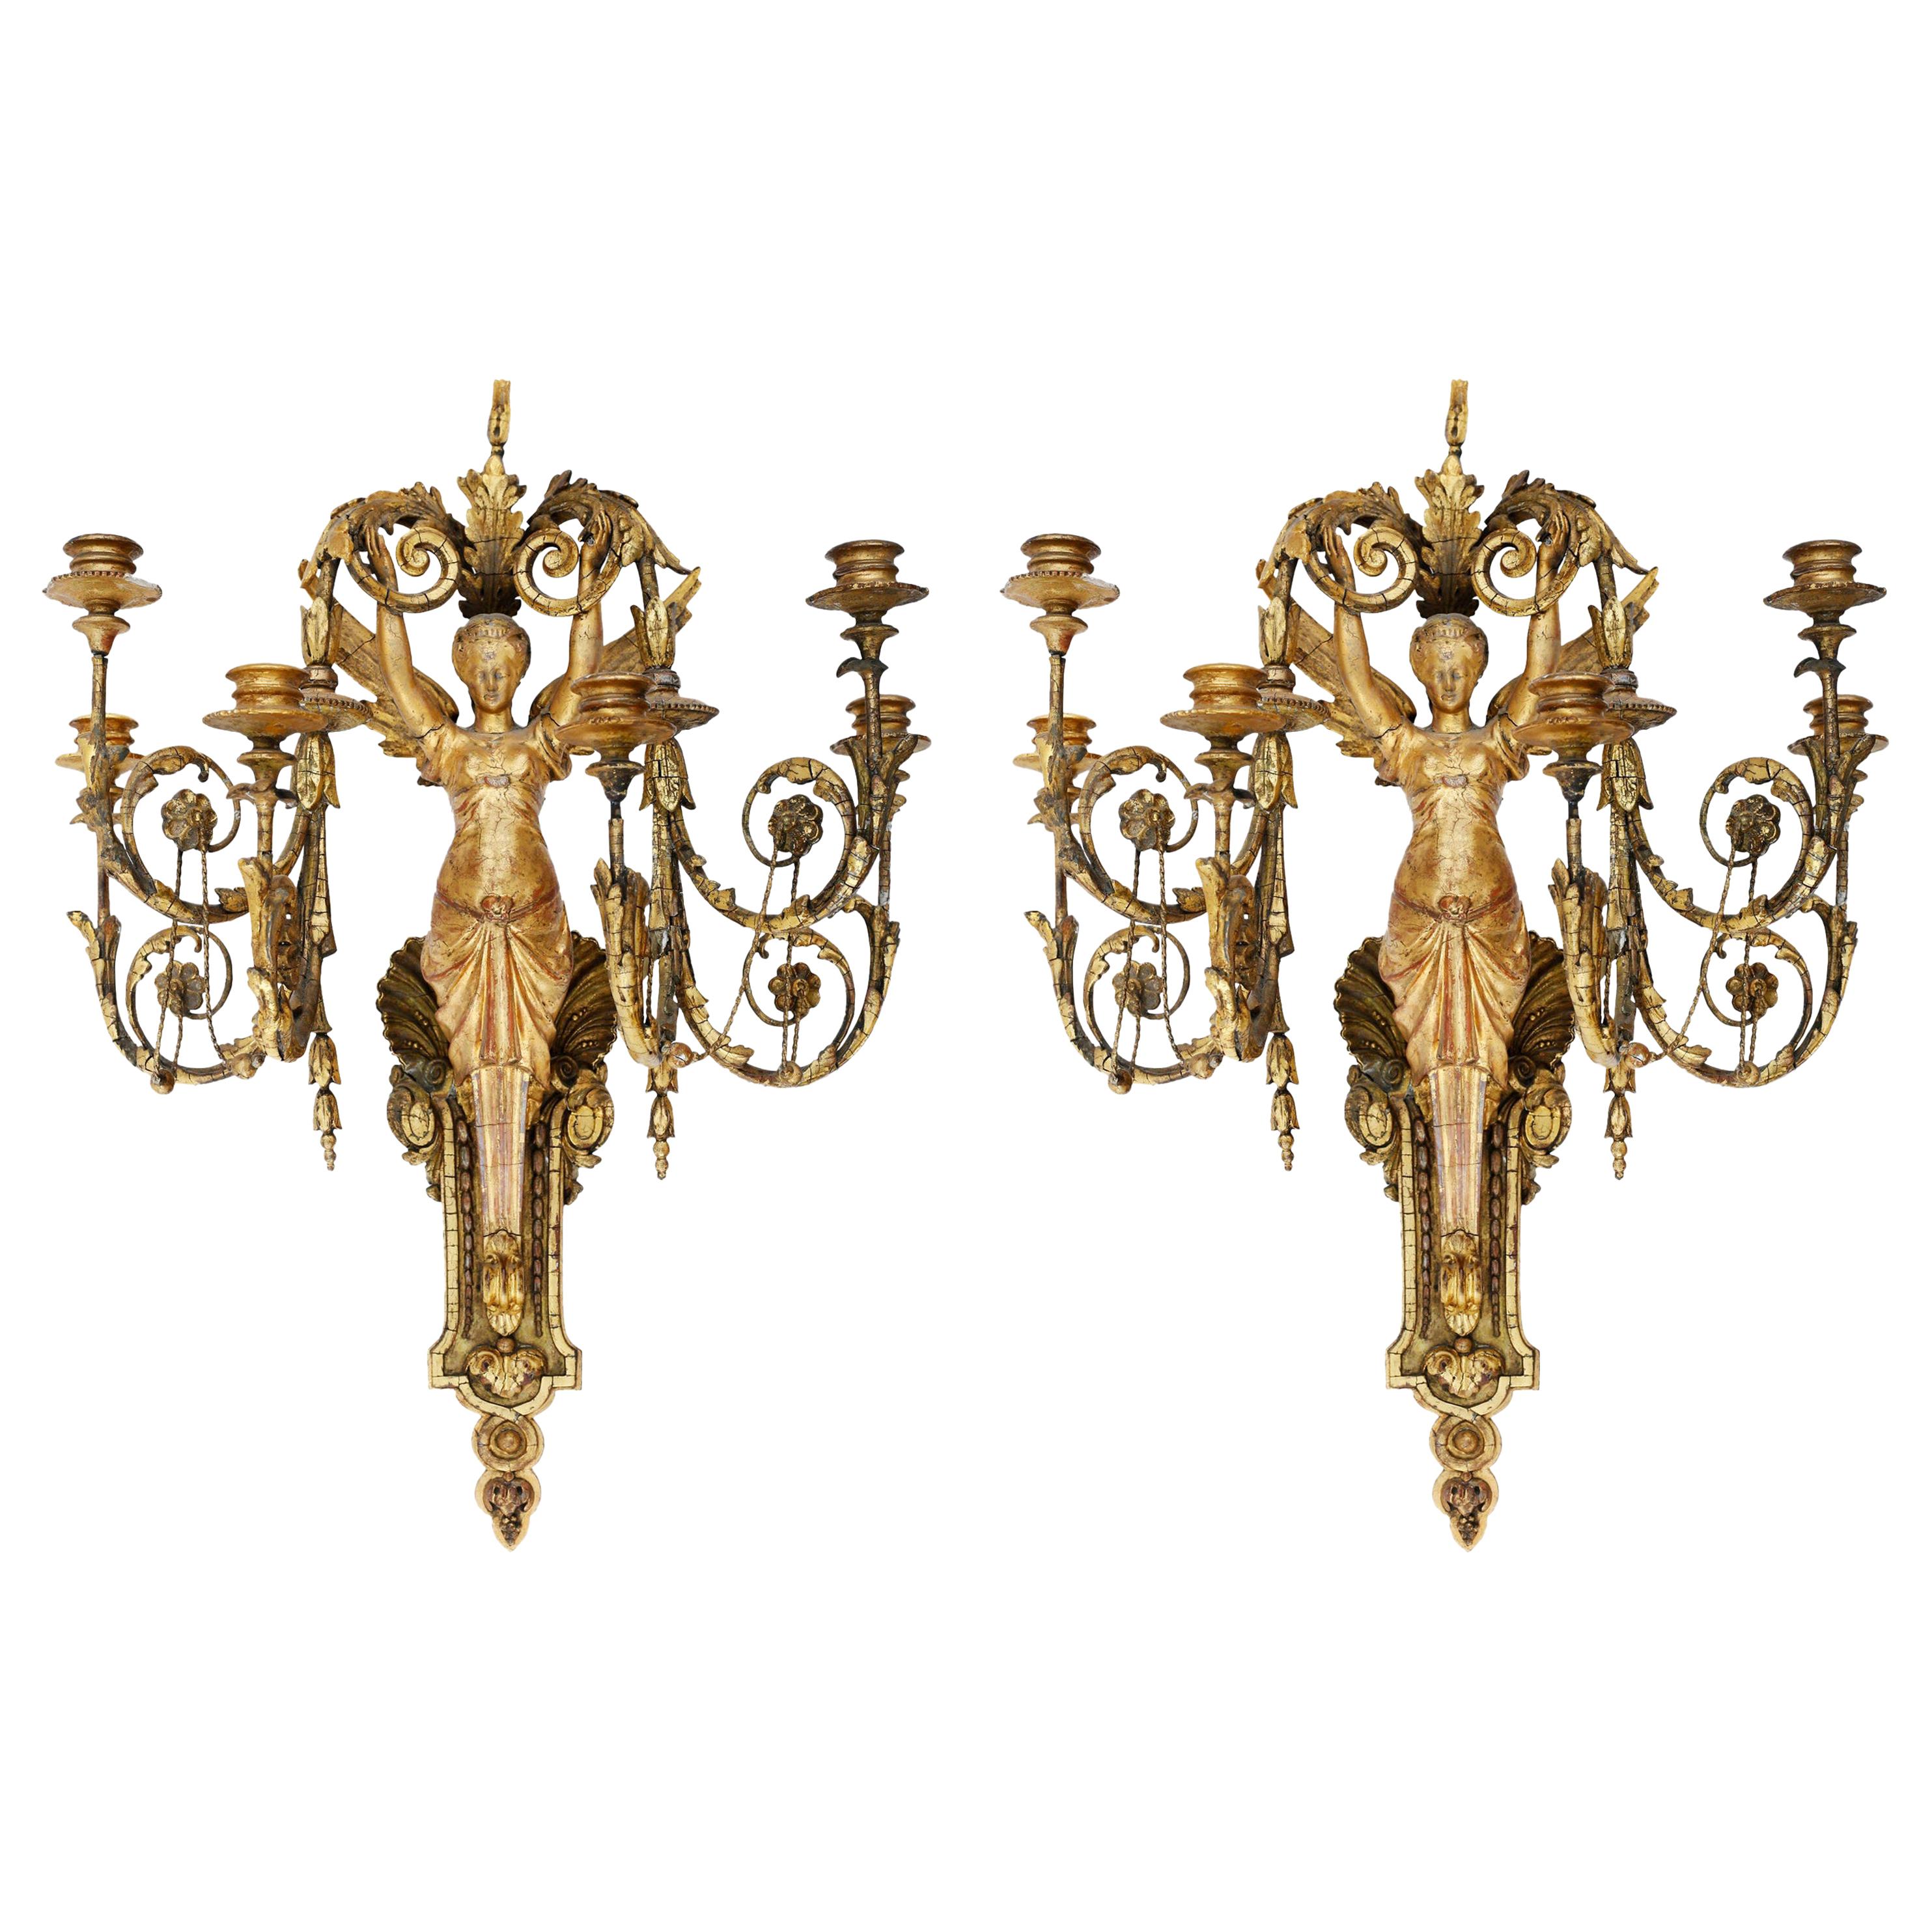 Pair of Early 19th Century Italian Neoclassical Gilt Figural Six-Light Sconces